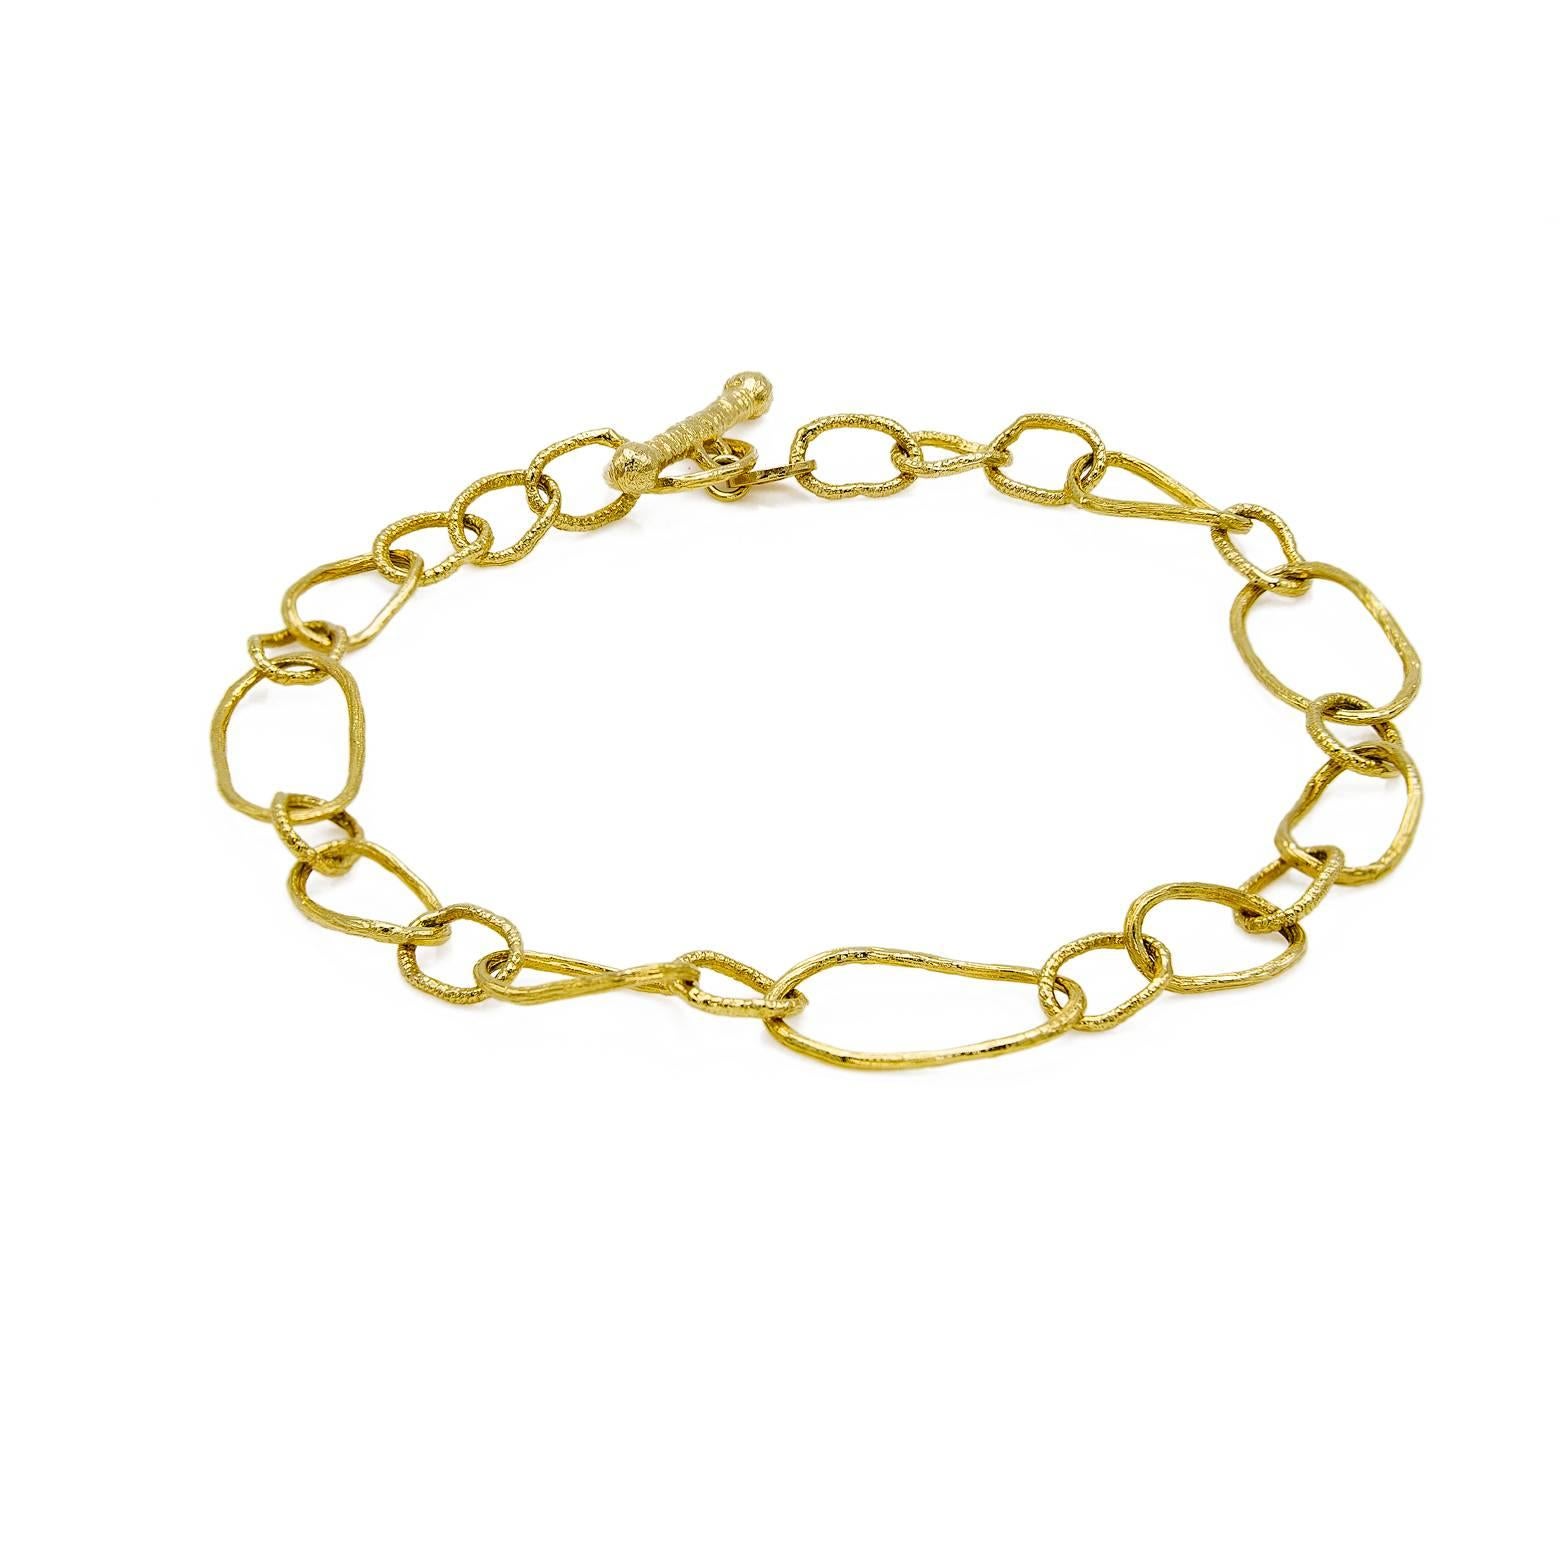 This architecturally designed bracelet with the different shapes of chain links and the alternating textures of each unique oval is absolutely stunning. The bright 14 karat yellow gold shines in thousands of directions with the artist's dedication